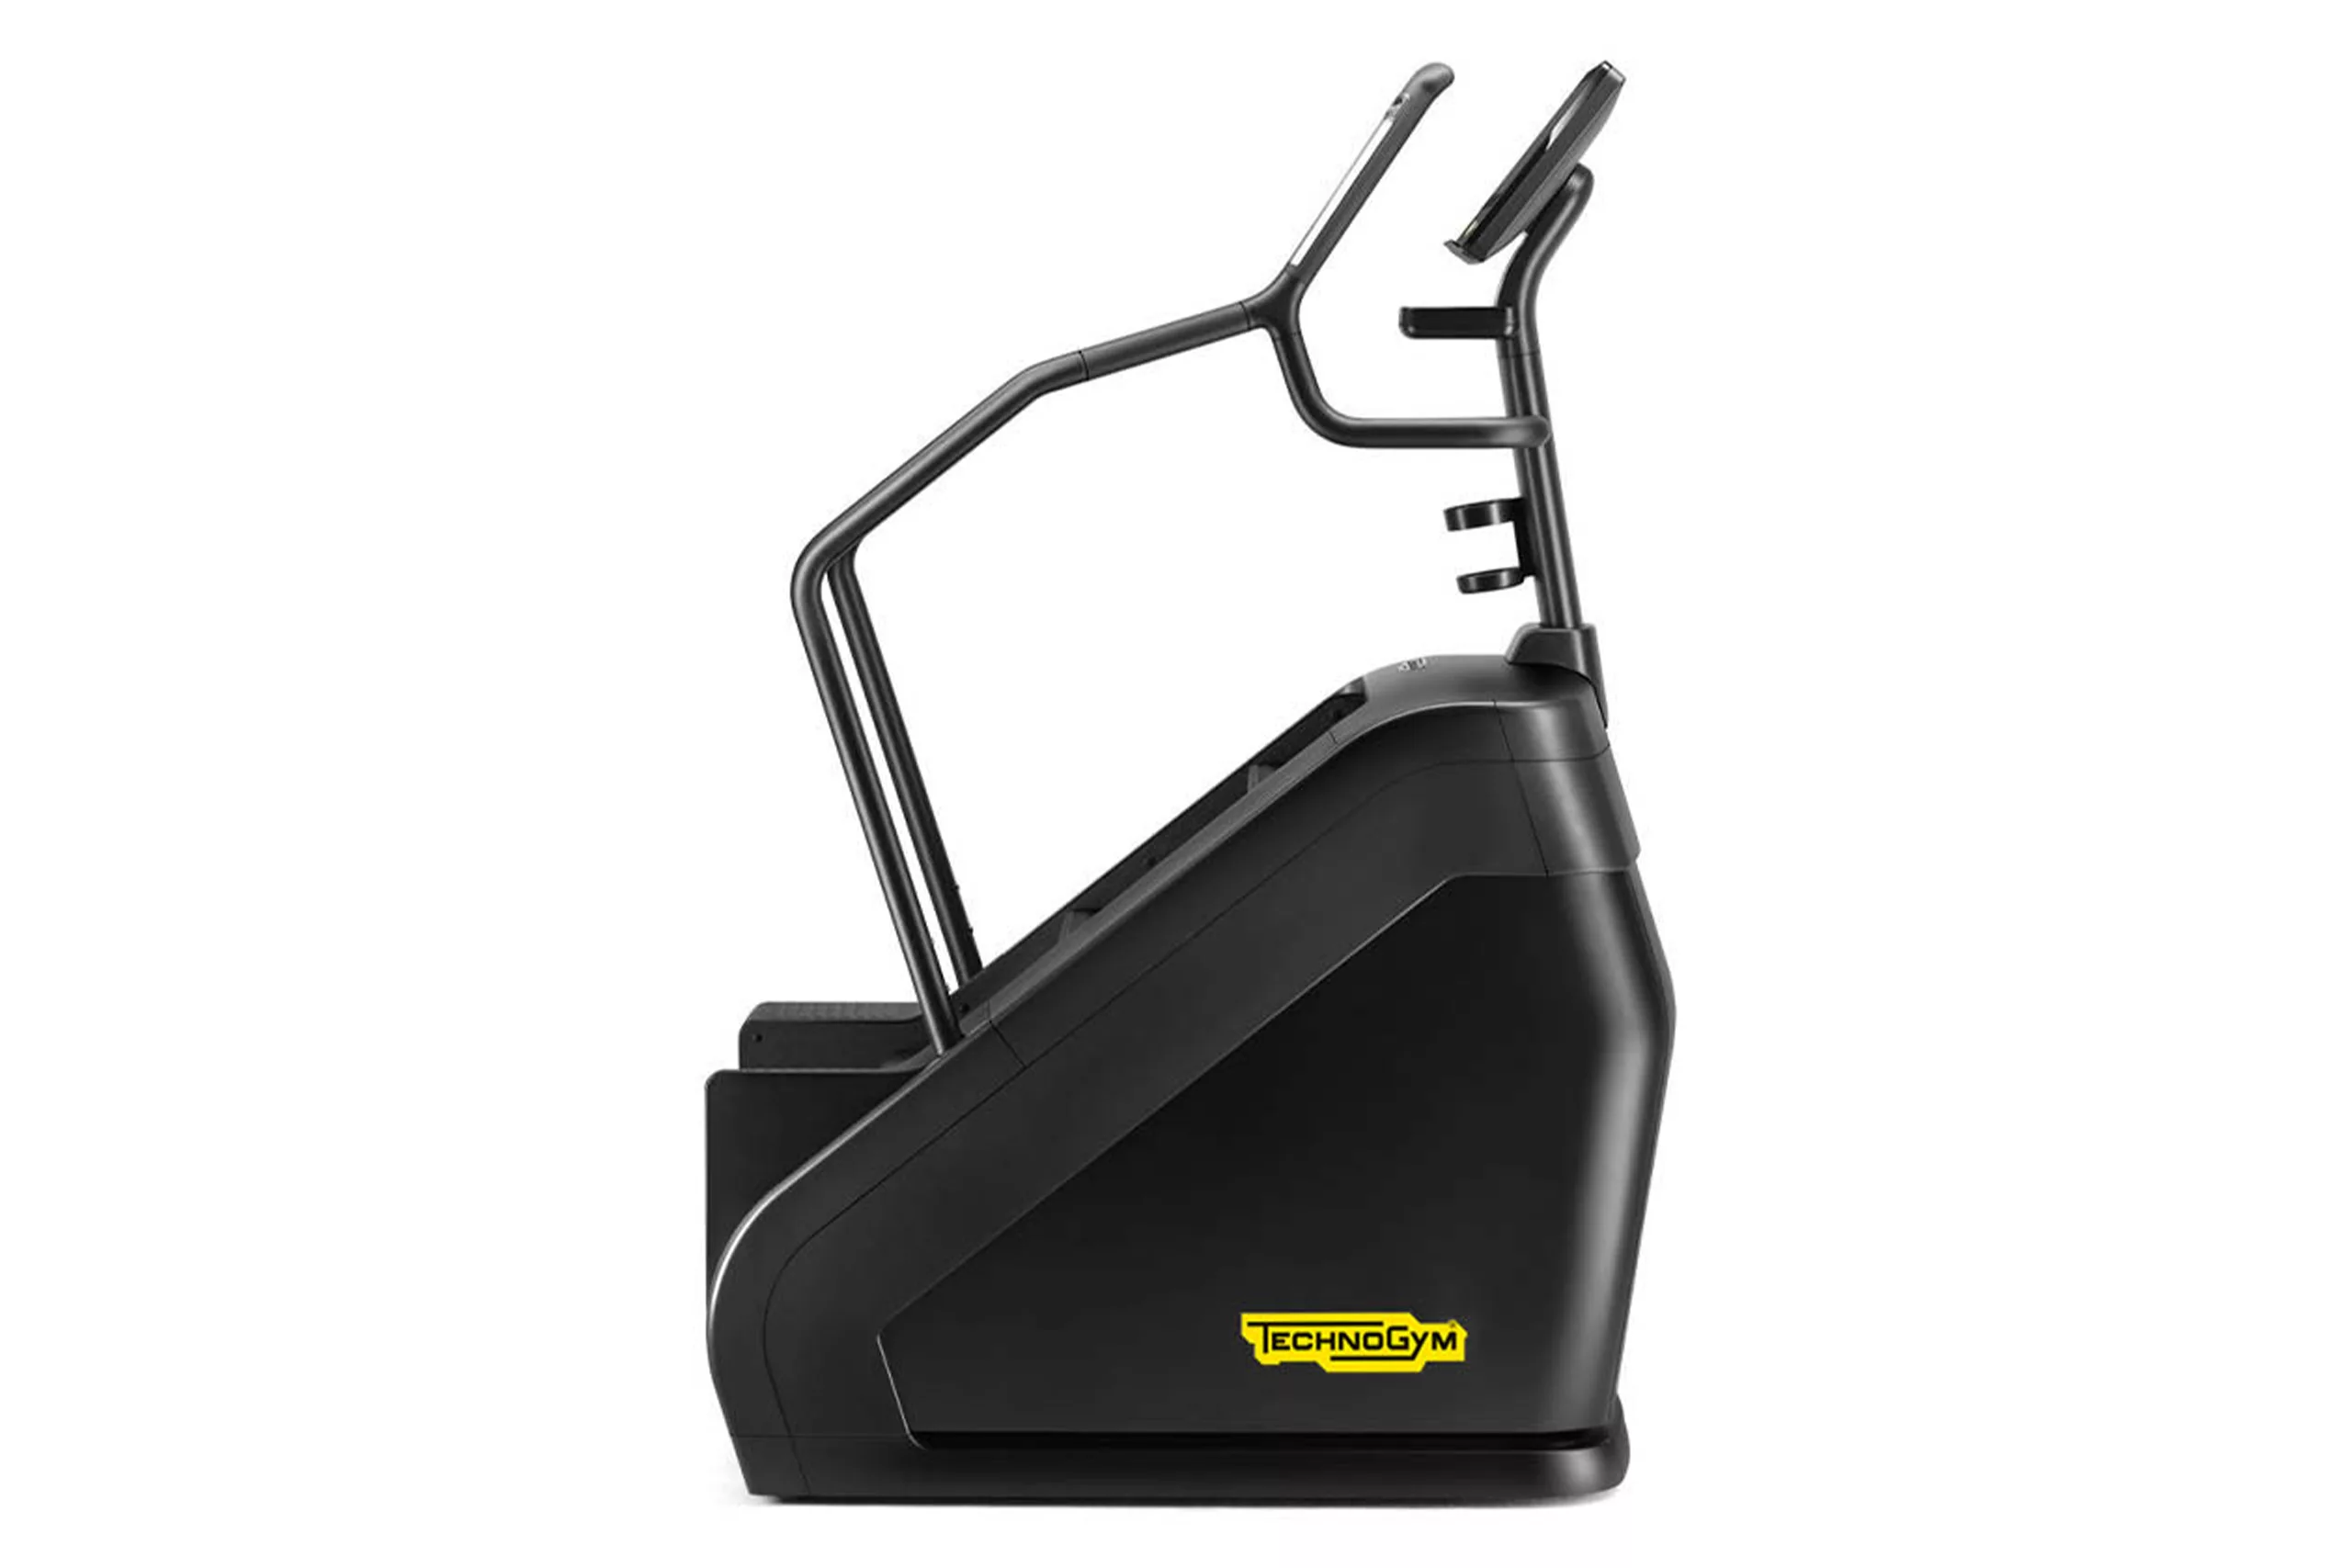 A product image of a Technogym stair machine.